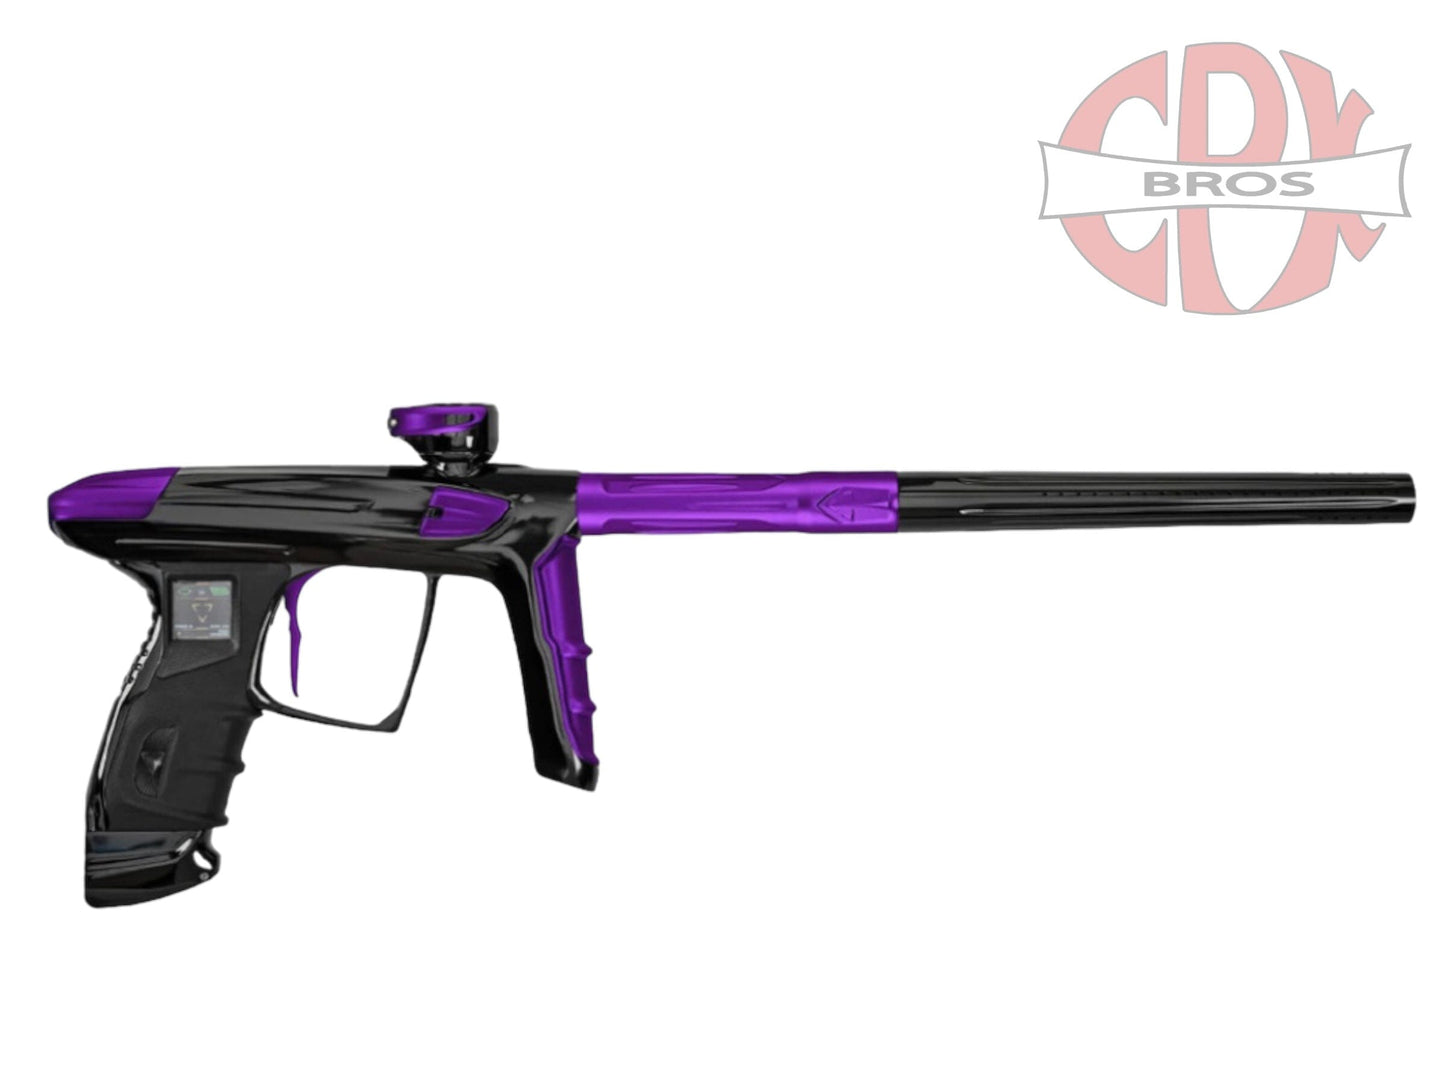 Used DLX Luxe IDOL Gloss Black / Purple Paintball Gun from CPXBrosPaintball Buy/Sell/Trade Paintball Markers, New Paintball Guns, Paintball Hoppers, Paintball Masks, and Hormesis Headbands